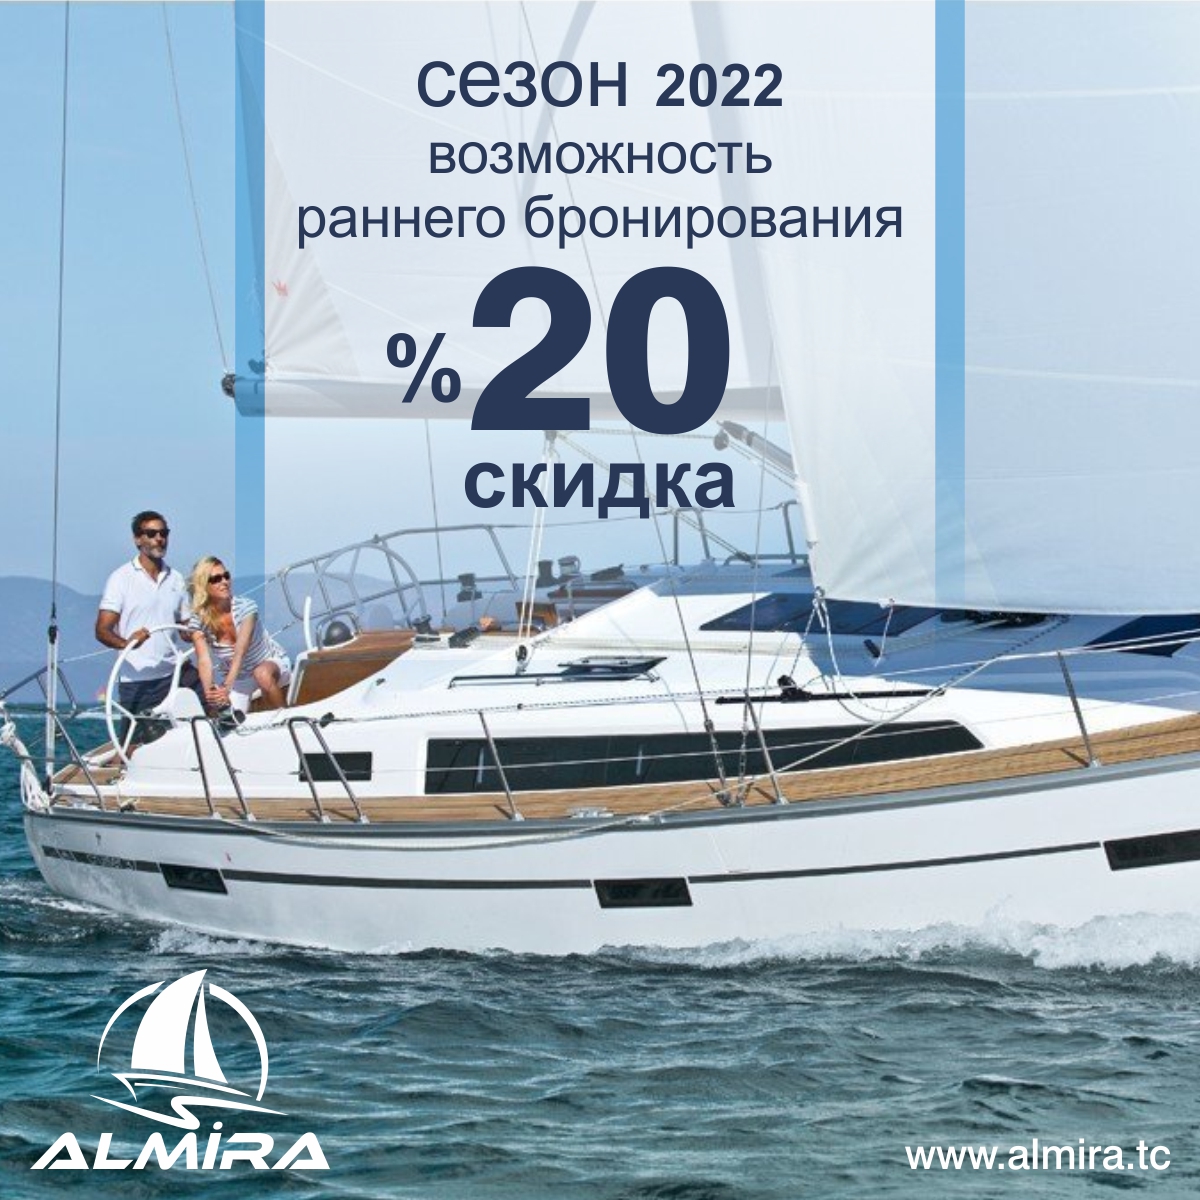 %20 erarly booking discount on sail yacht charter